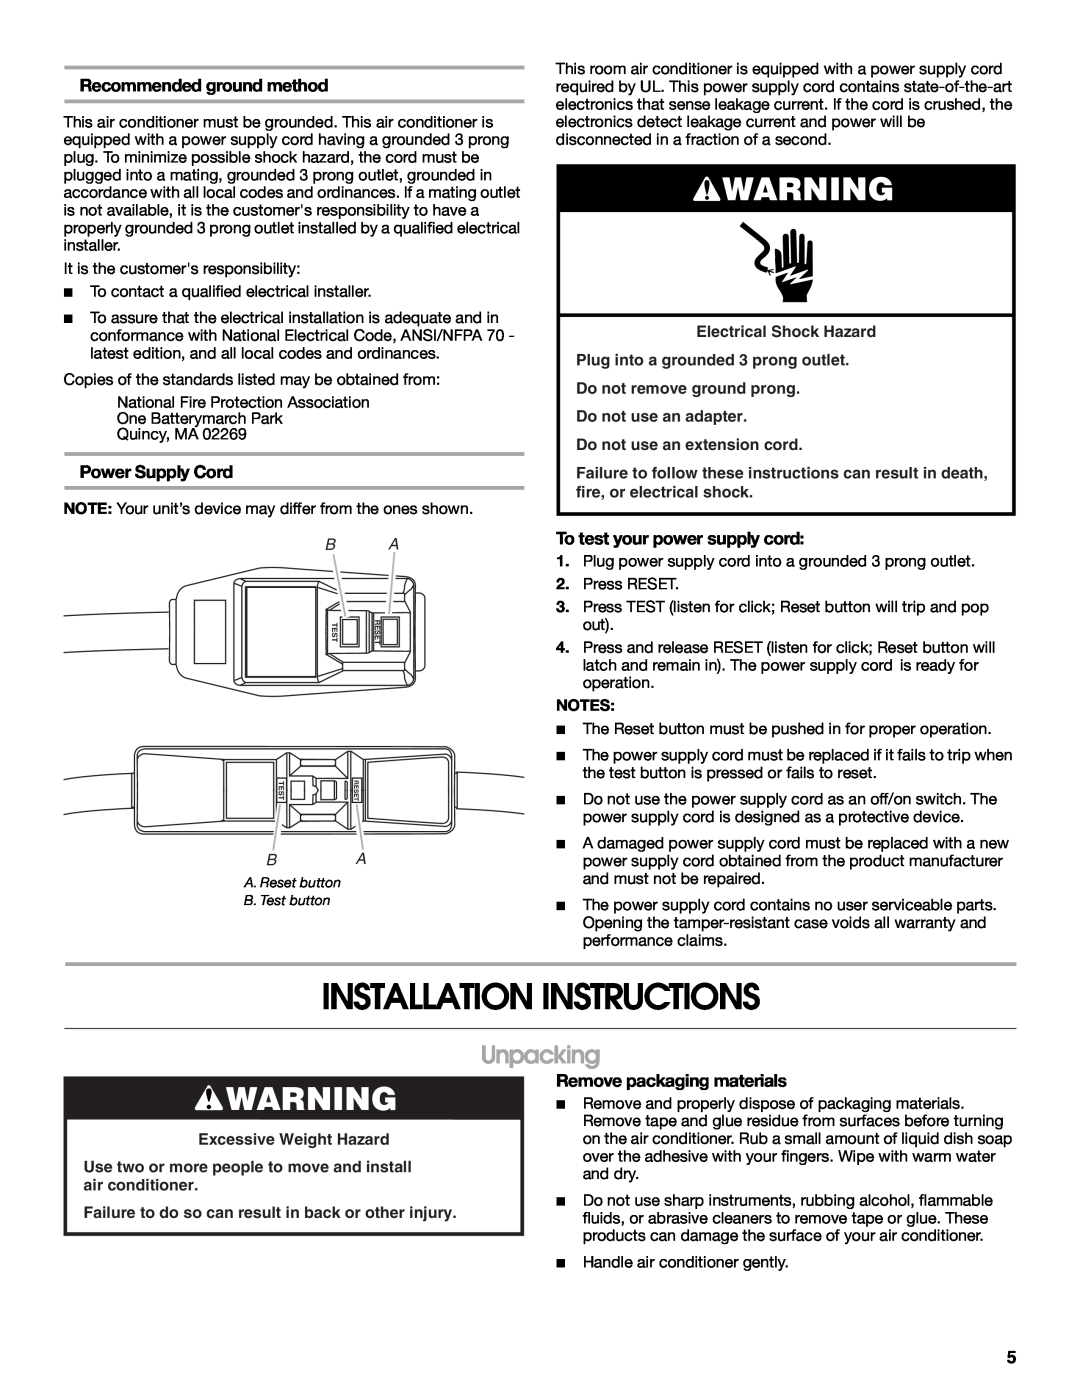 Whirlpool ACE184XR0 manual Installation Instructions, Unpacking, Recommended ground method, Power Supply Cord 